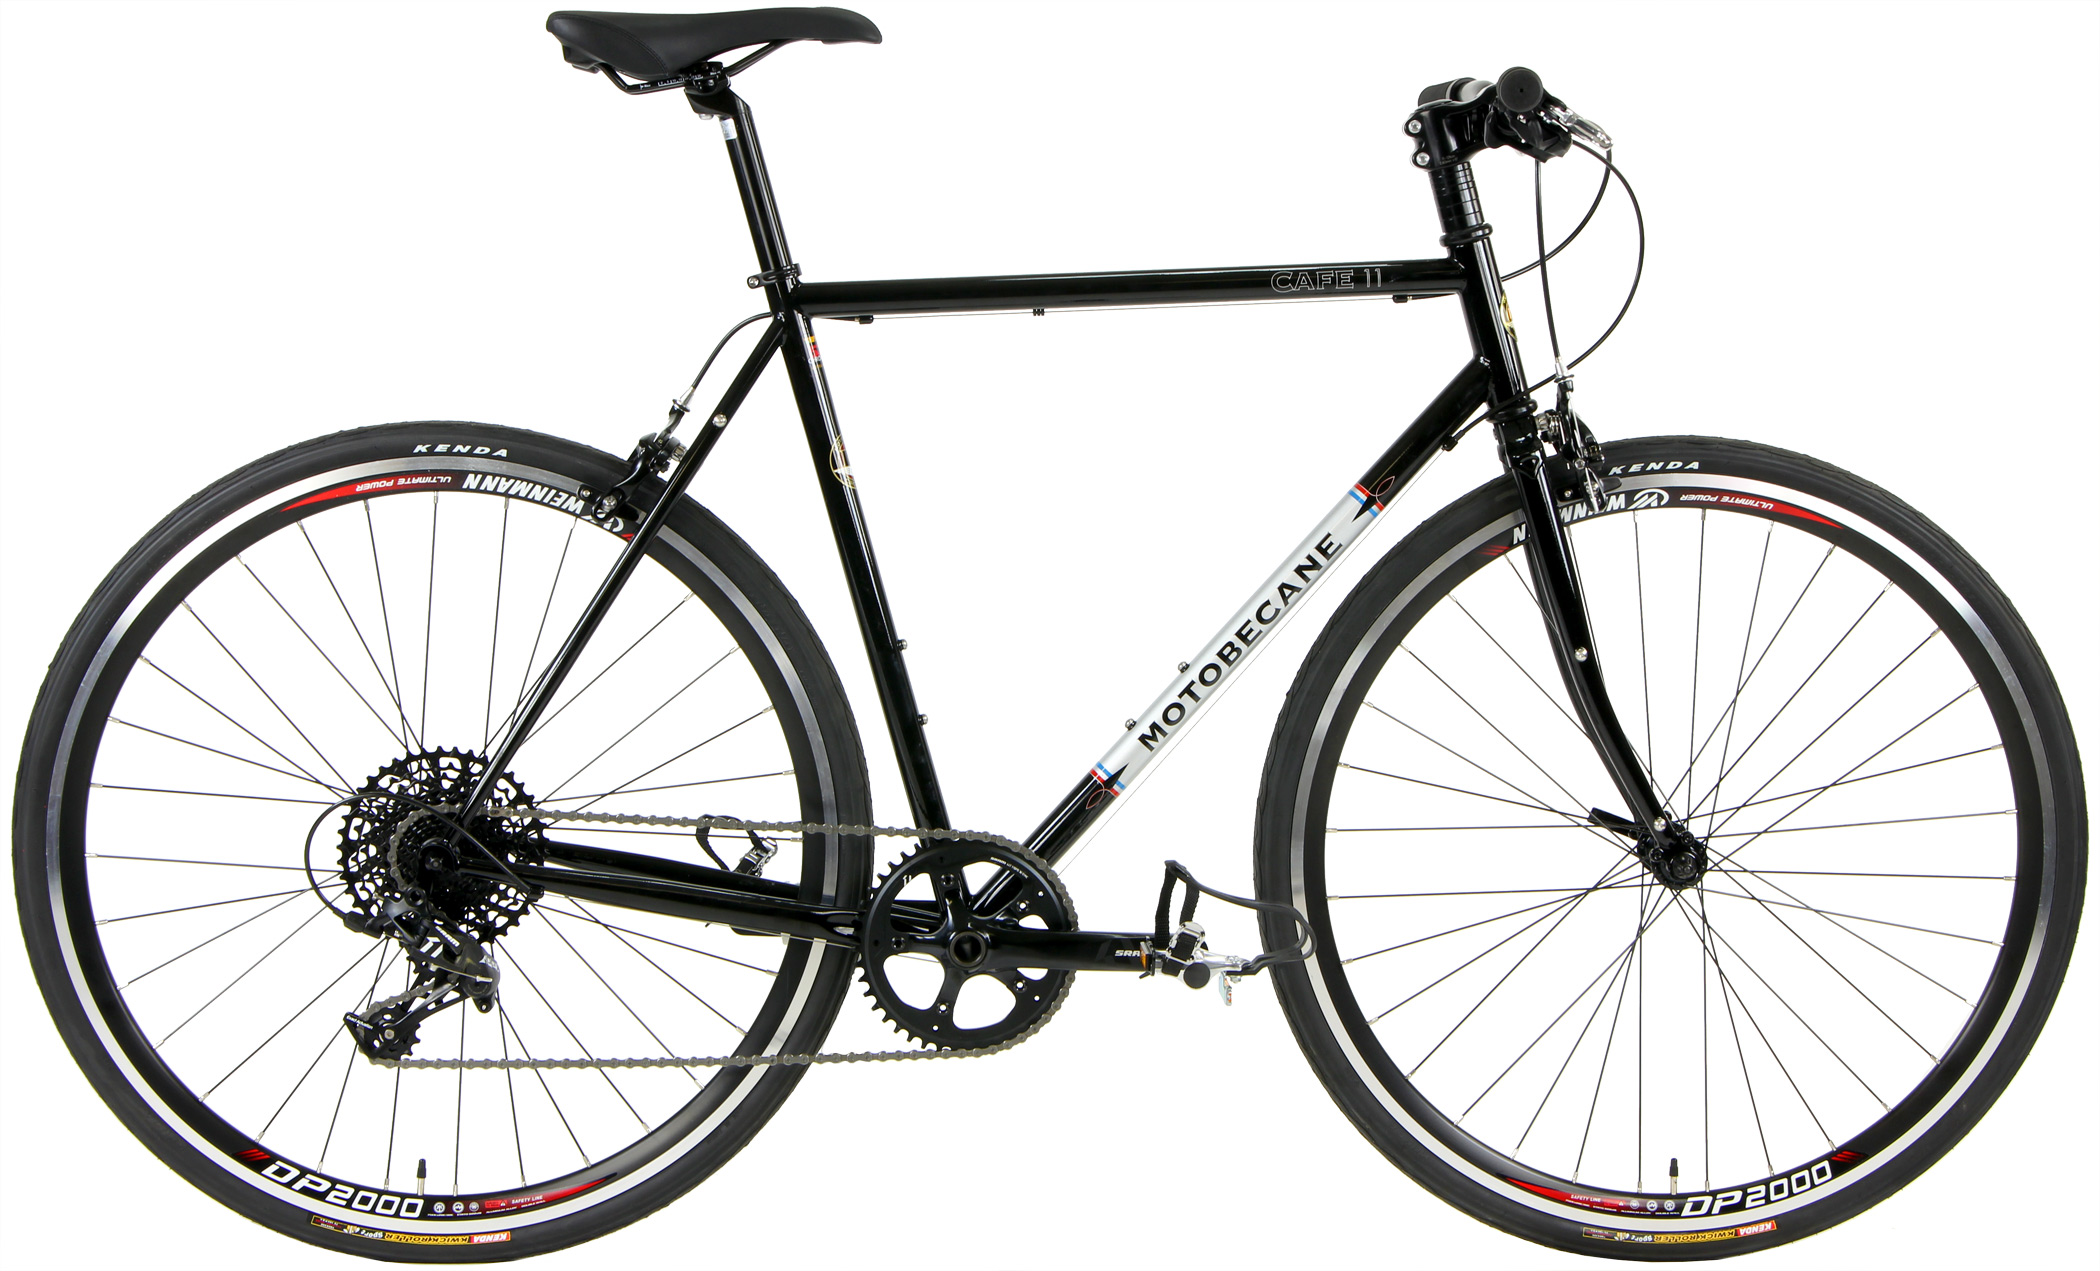 Save Up to 60% Off NEW SRAM Apex 1x11, High Grade Reynolds Steel Flat Bar Road Bikes On Sale + FREE SHIP 48 Super Road, Wide Tires, Reynolds High Grade Steel Flat